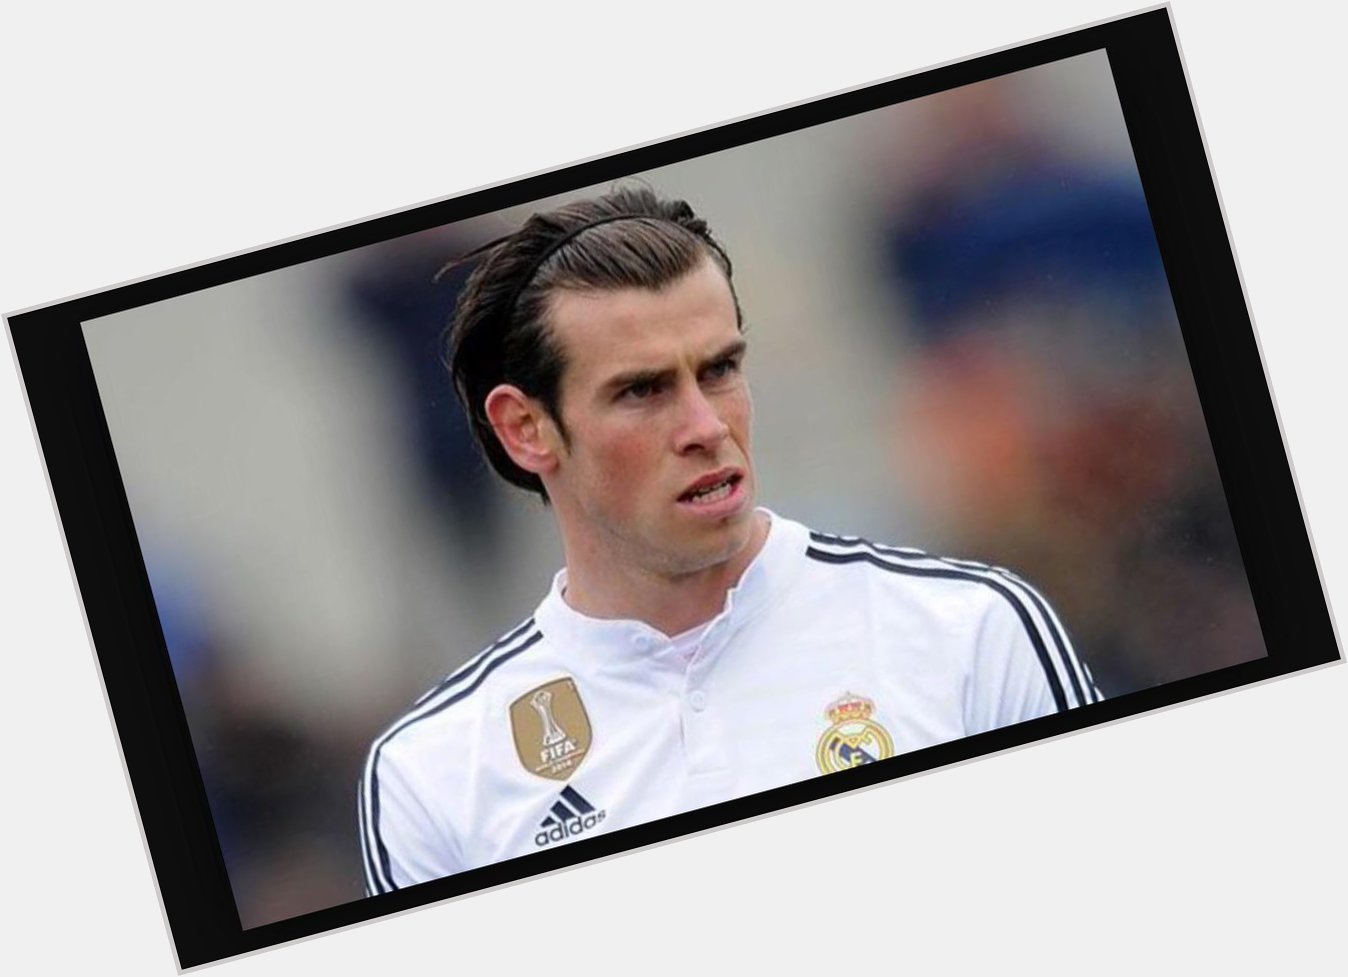 Happy birthday Gareth Bale from all of us at MH 